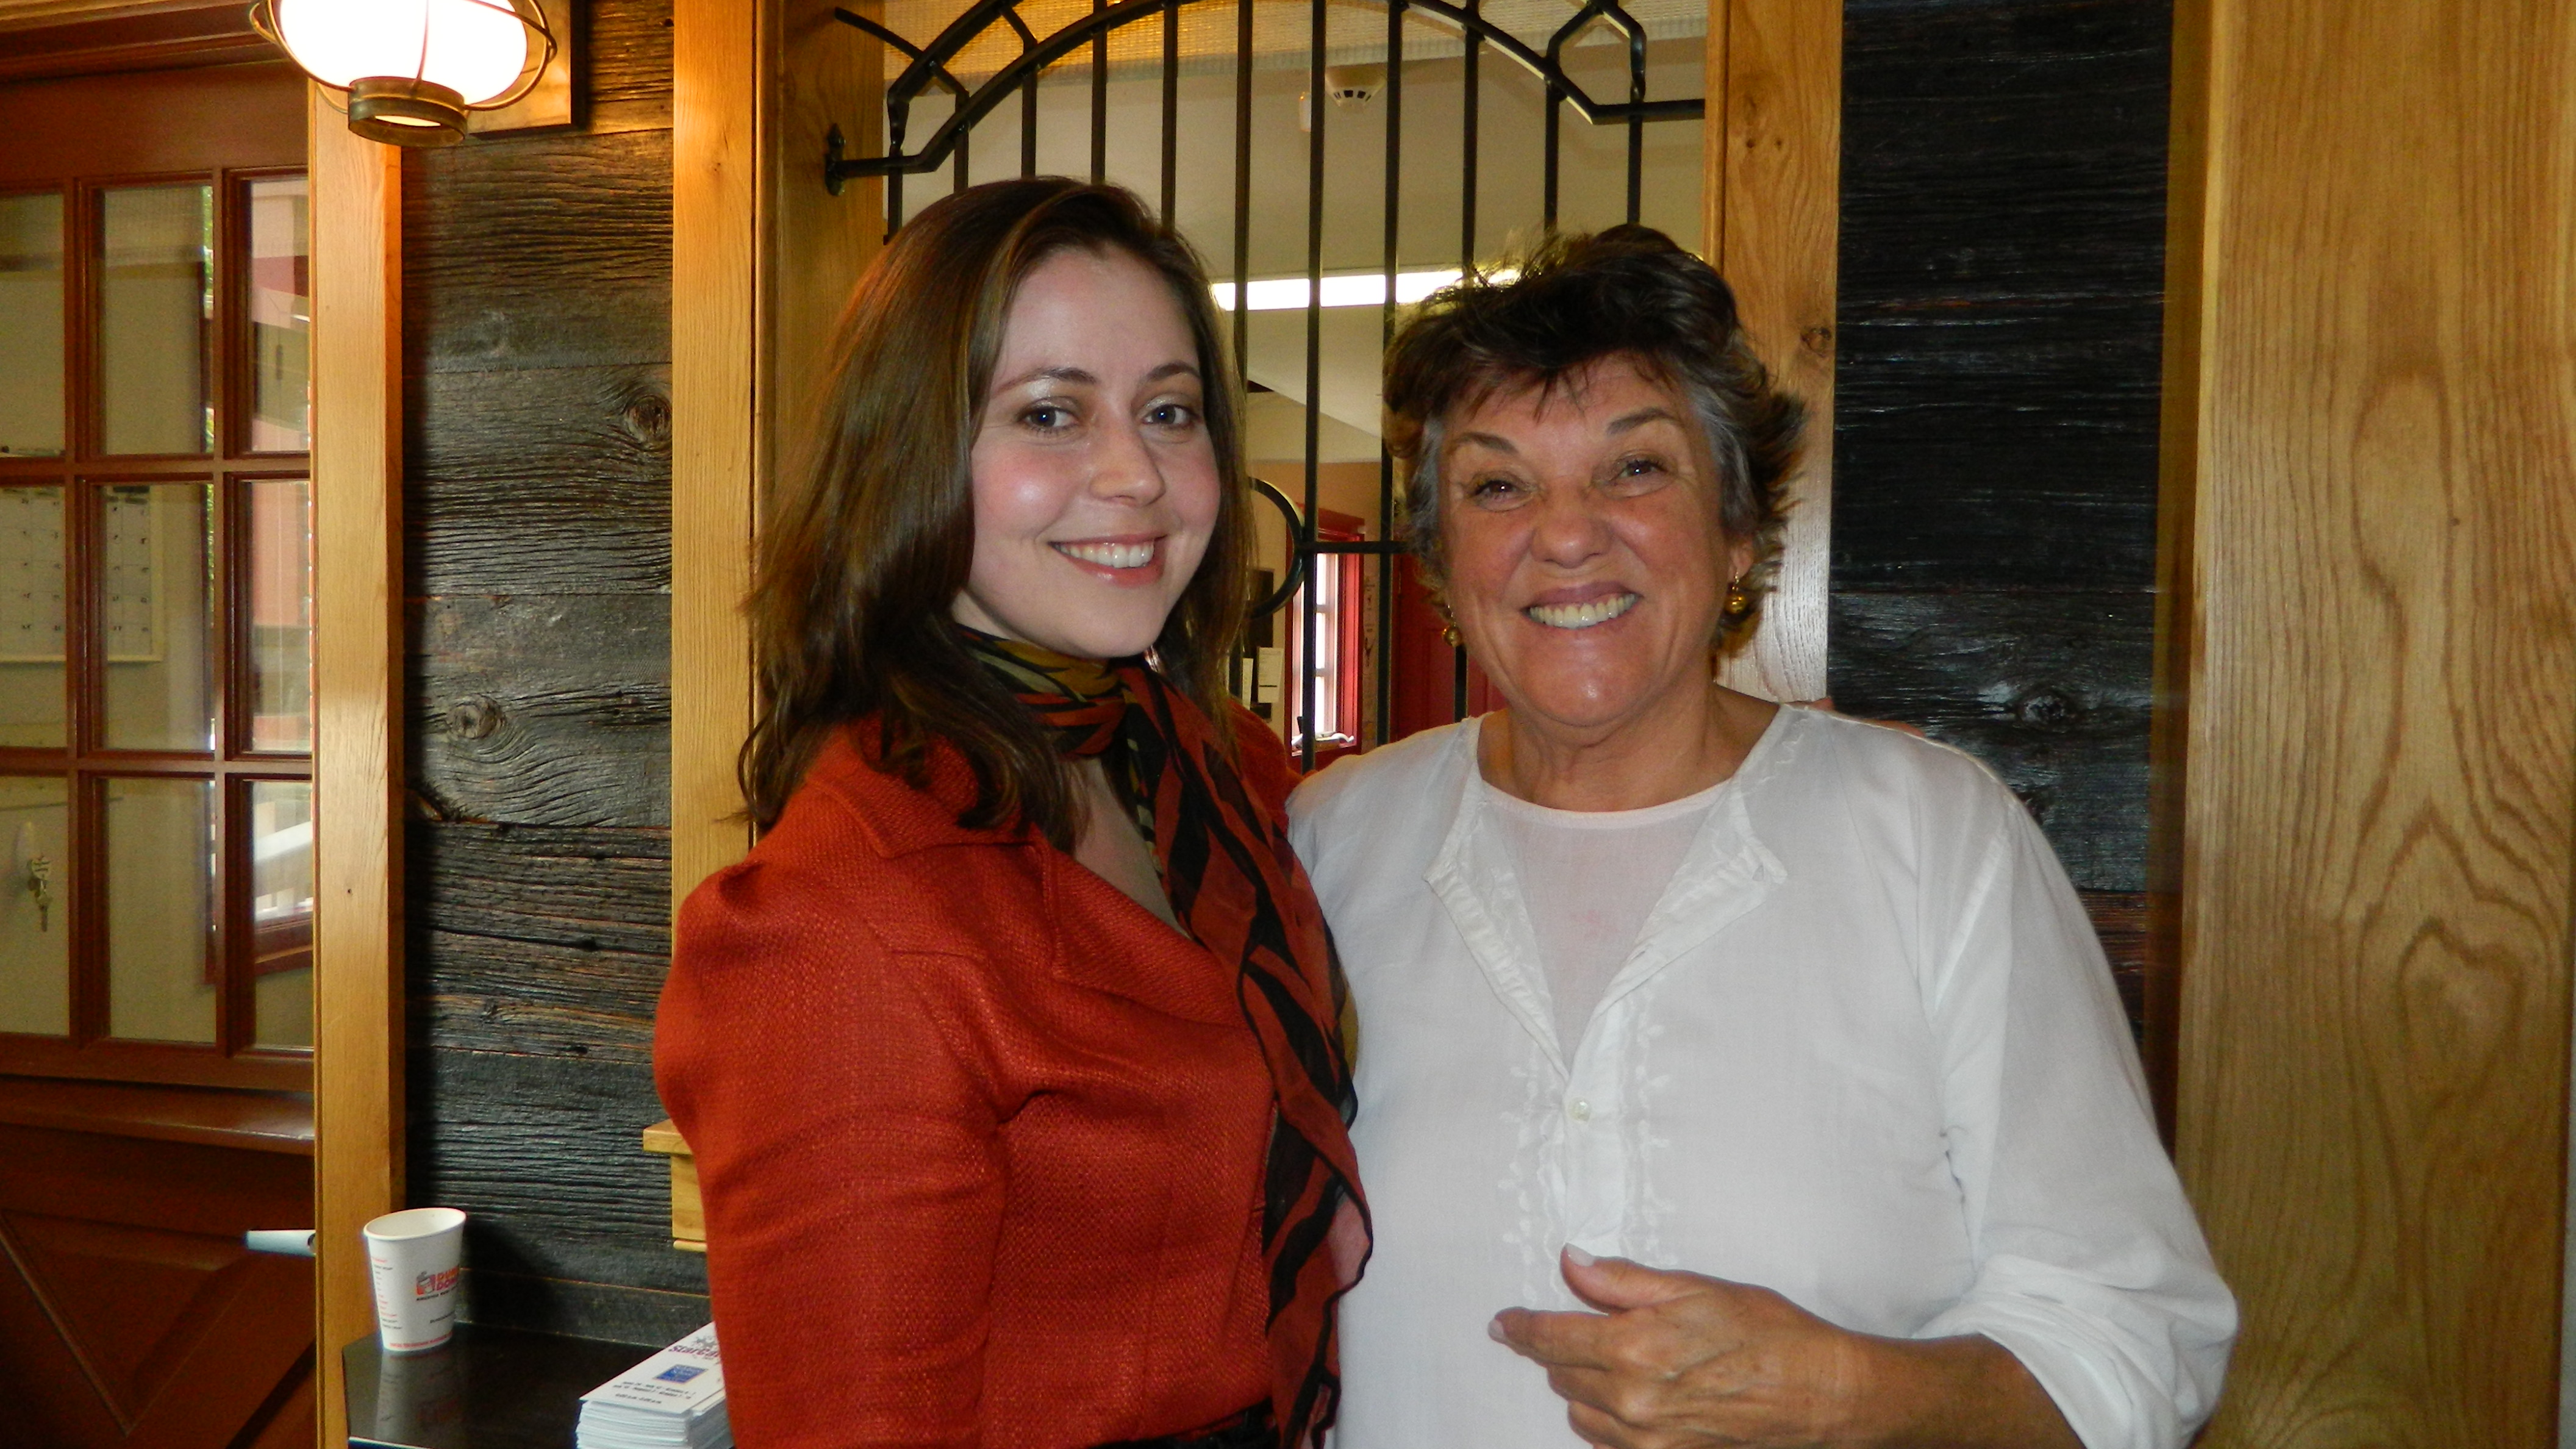 JaQuinley Kerr, Tyne Daly, at the Bucks County Playhouse press conference for Terrence McNally's 